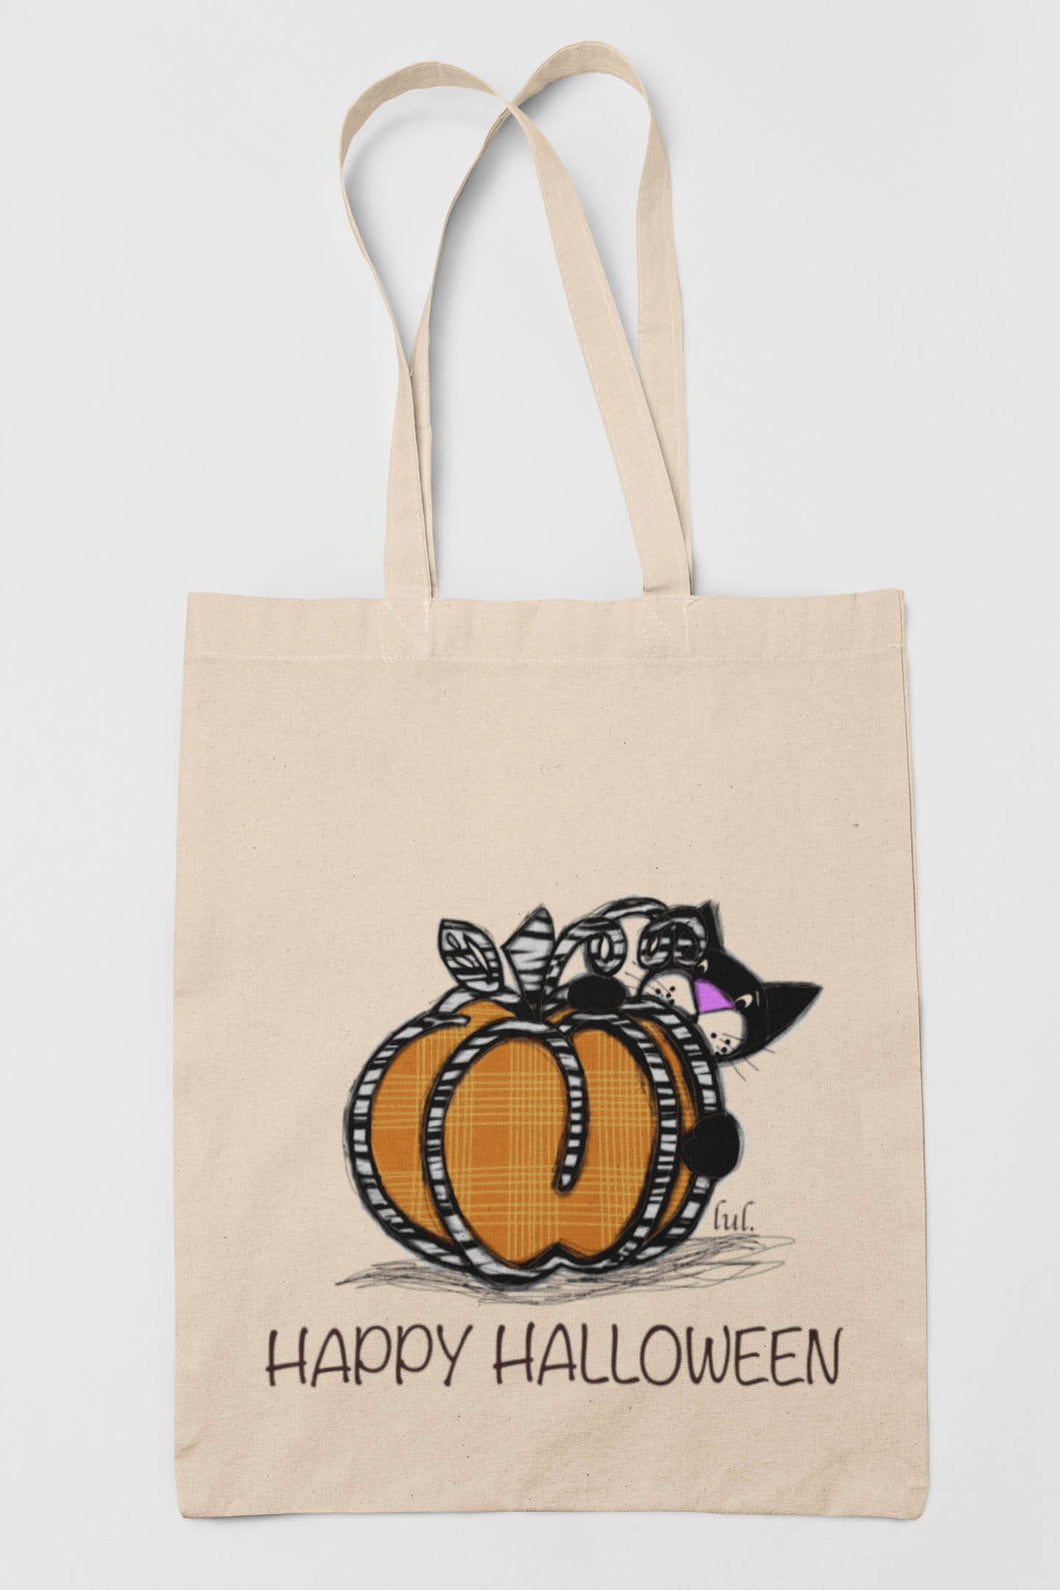 Black cat and pumpkin bag - Halloween - Bags and pouches